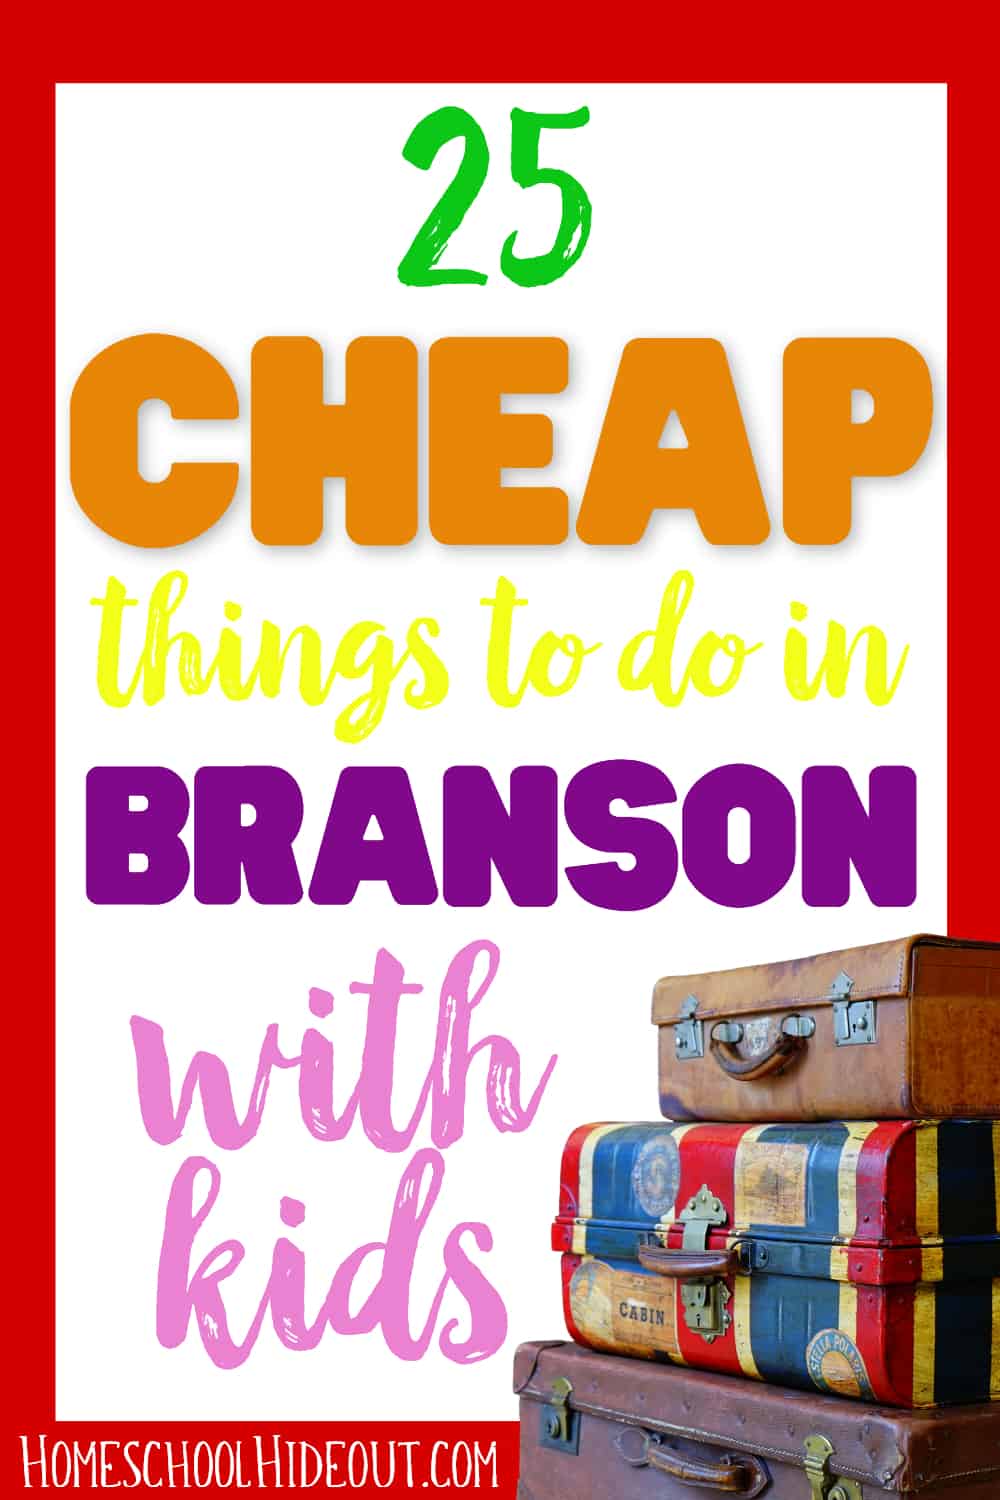 FINALLY found some cheap things to do in Branson with kids! We are so doing #9 next time we're there! #branson #travelwithkids #minivacation